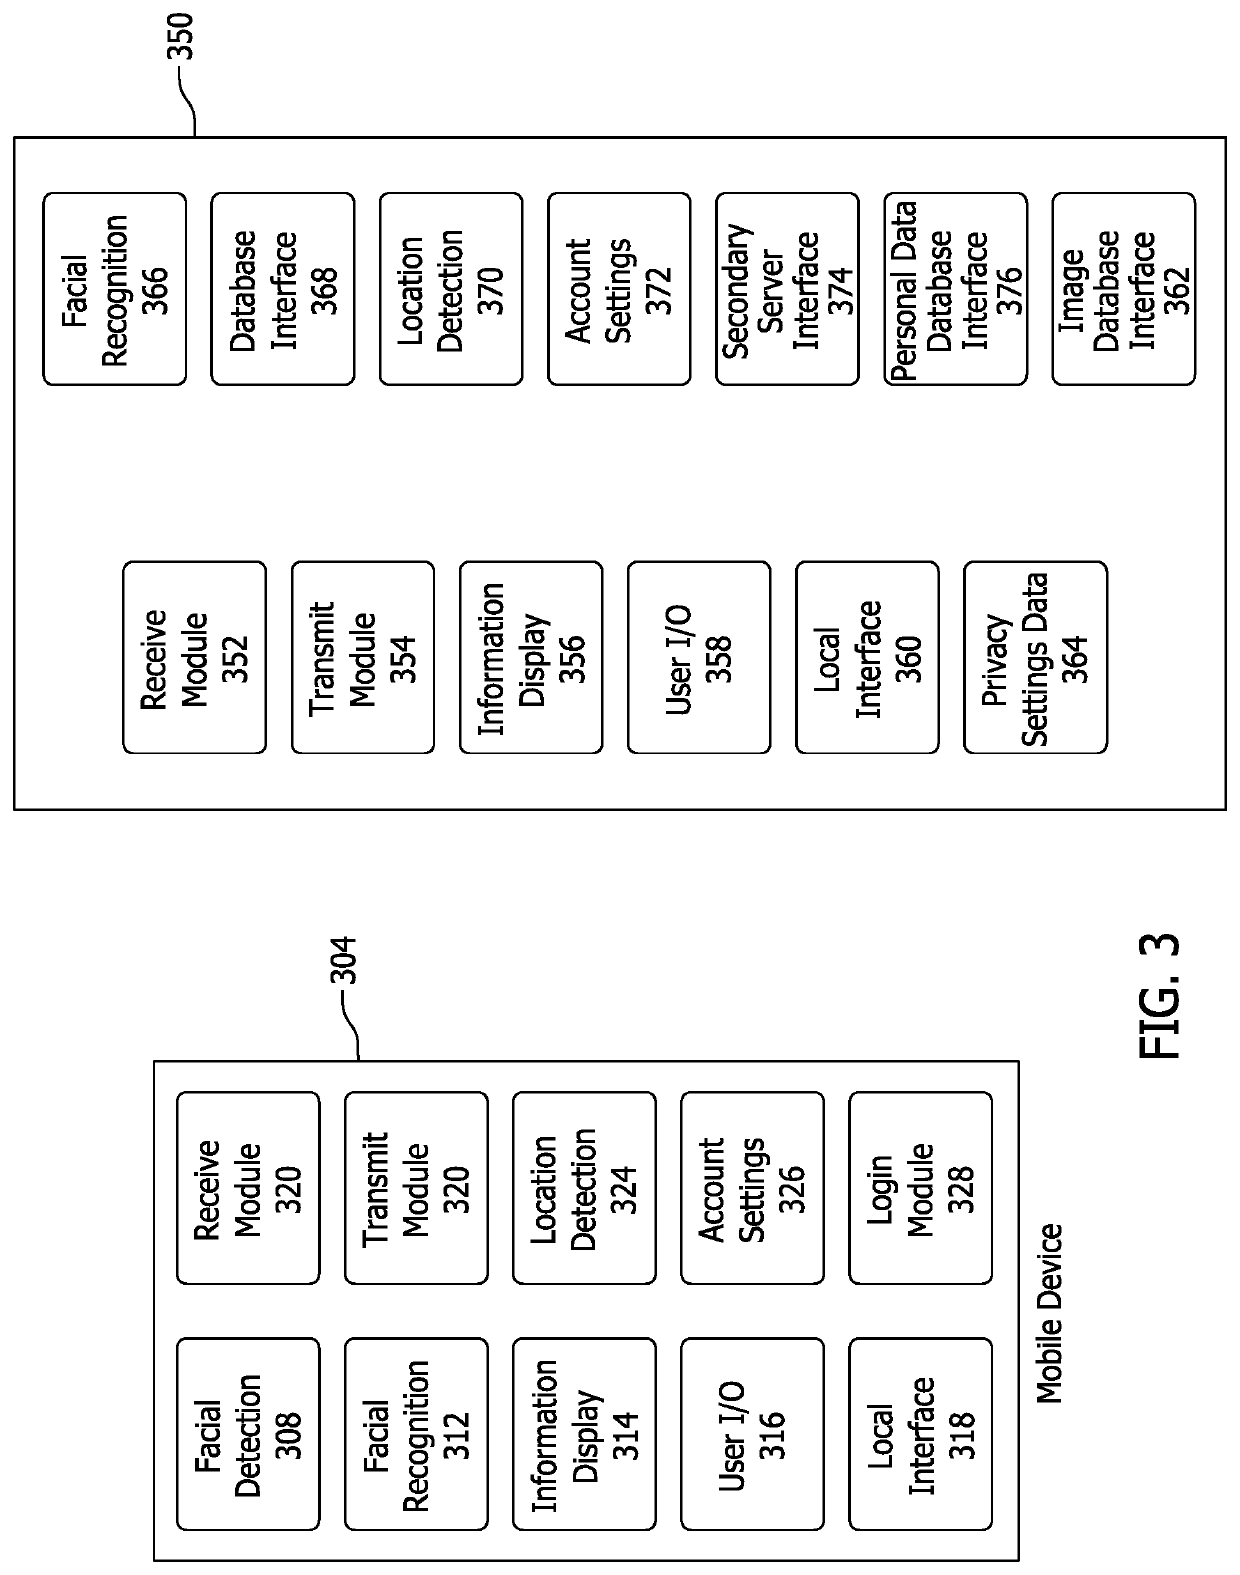 Facial recognition authentication system including path parameters